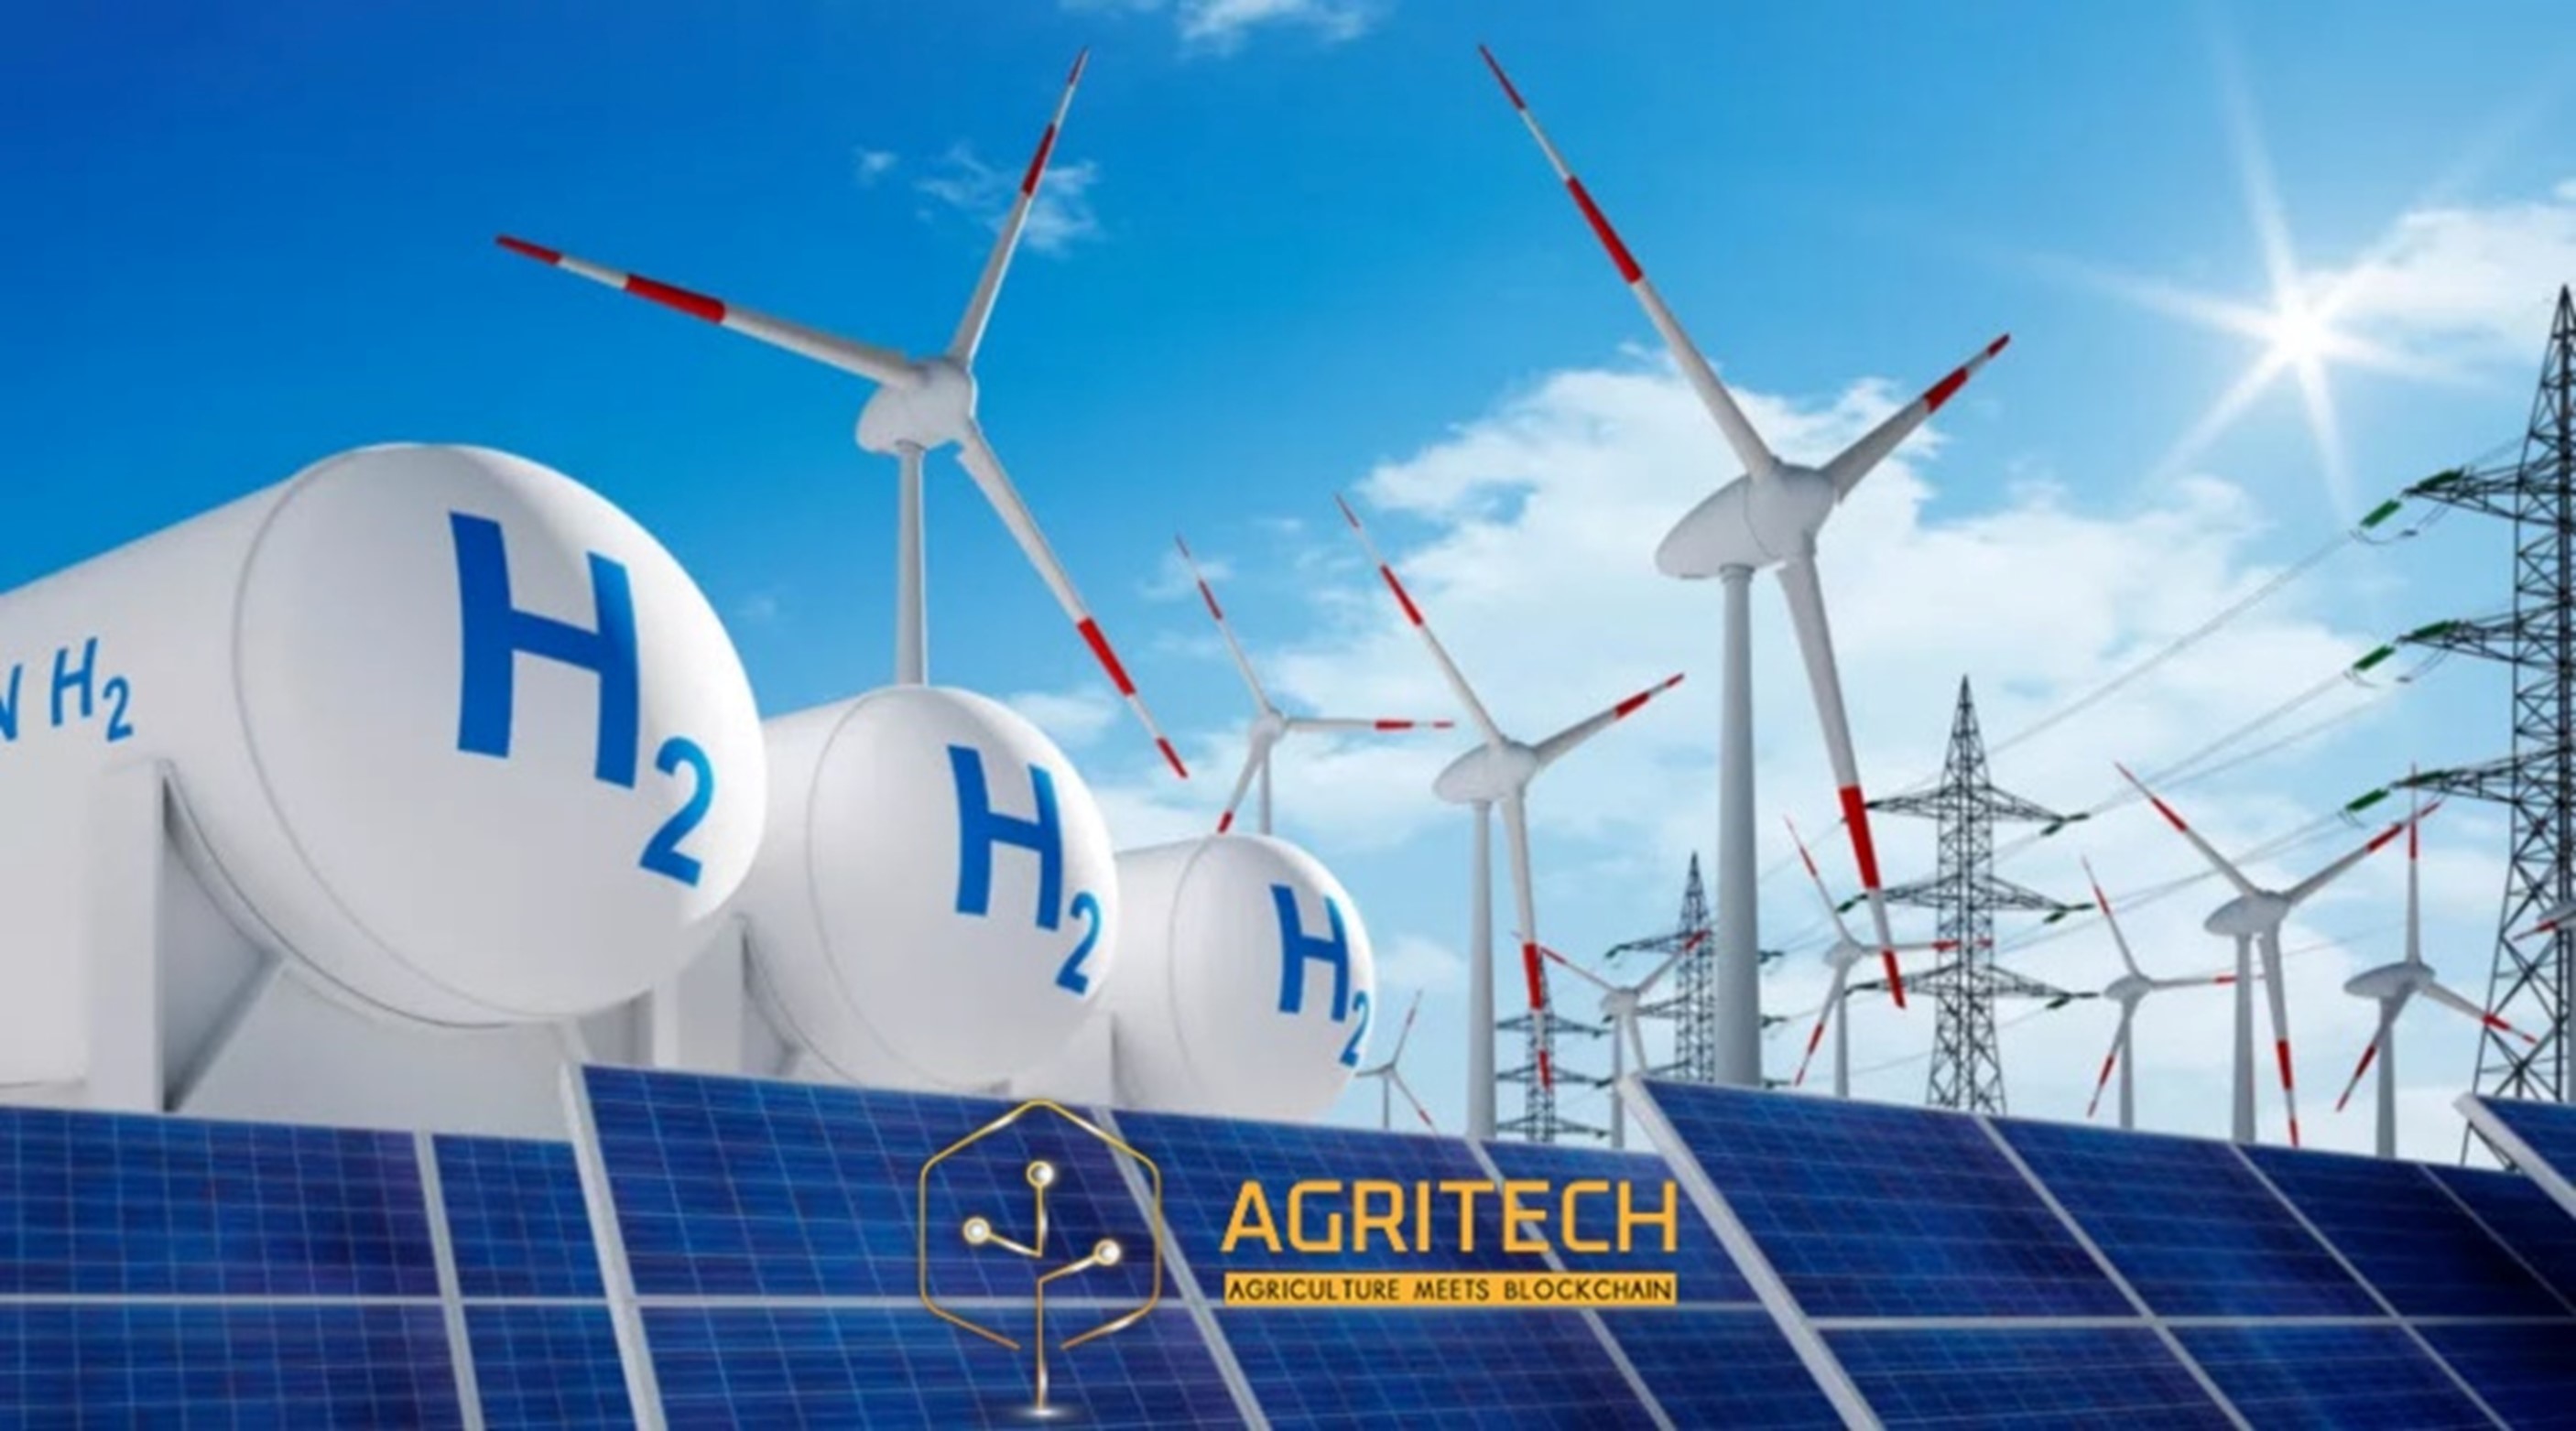 AGRITECH and Telfort Collaborate to Reconstruct Haiti With Renewable and Sustainable Sources Including Hydrogen Energy